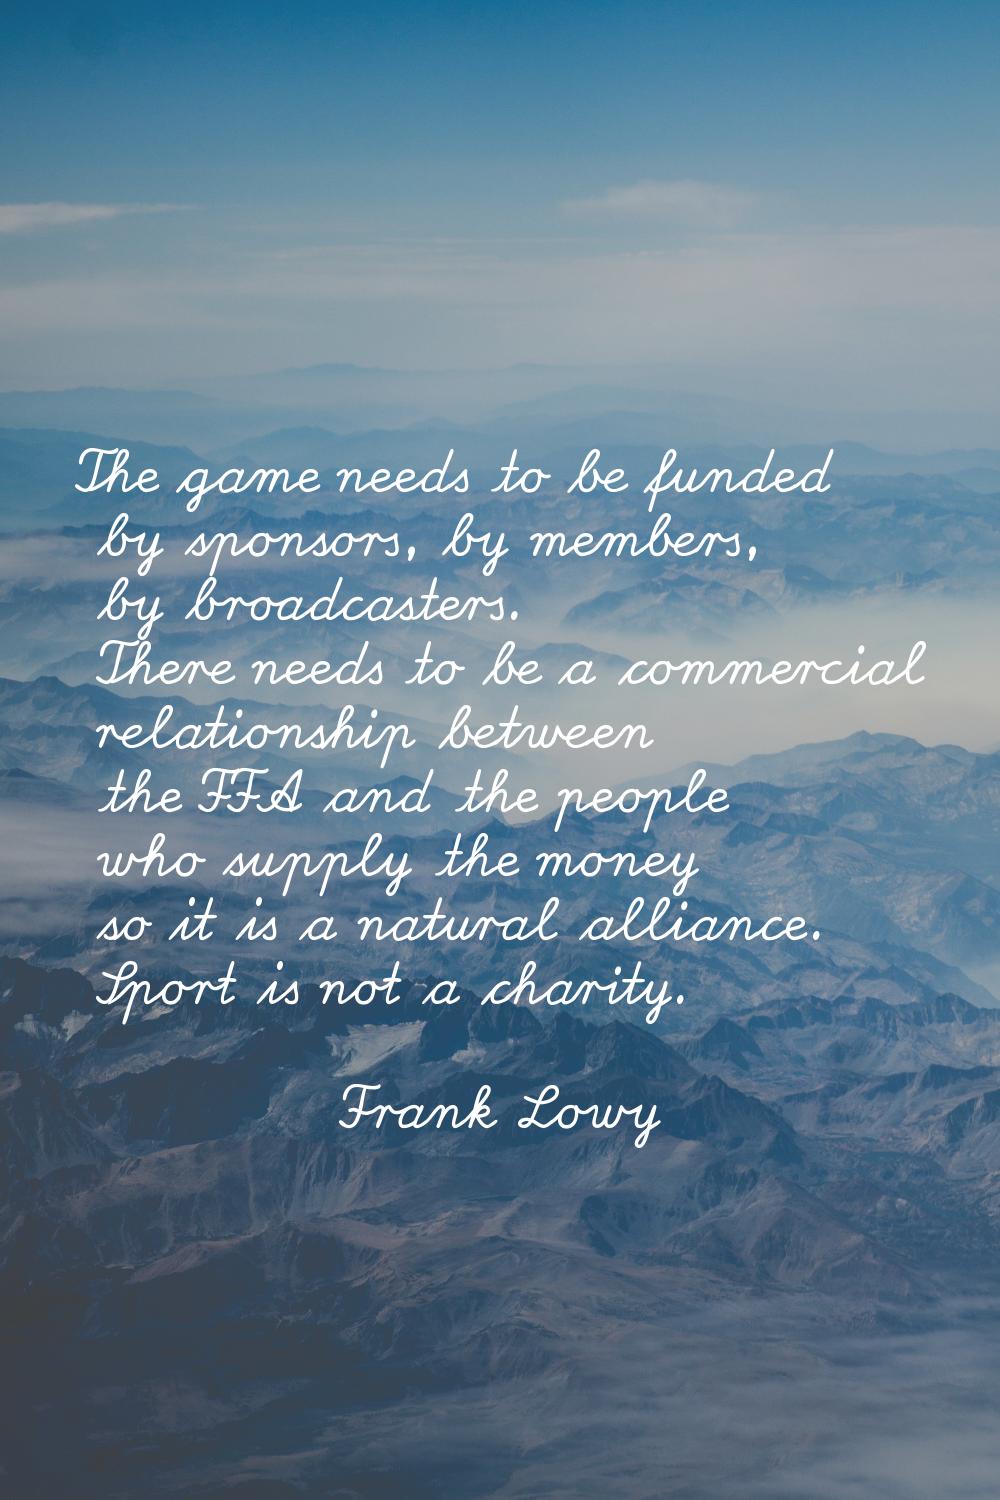 The game needs to be funded by sponsors, by members, by broadcasters. There needs to be a commercia